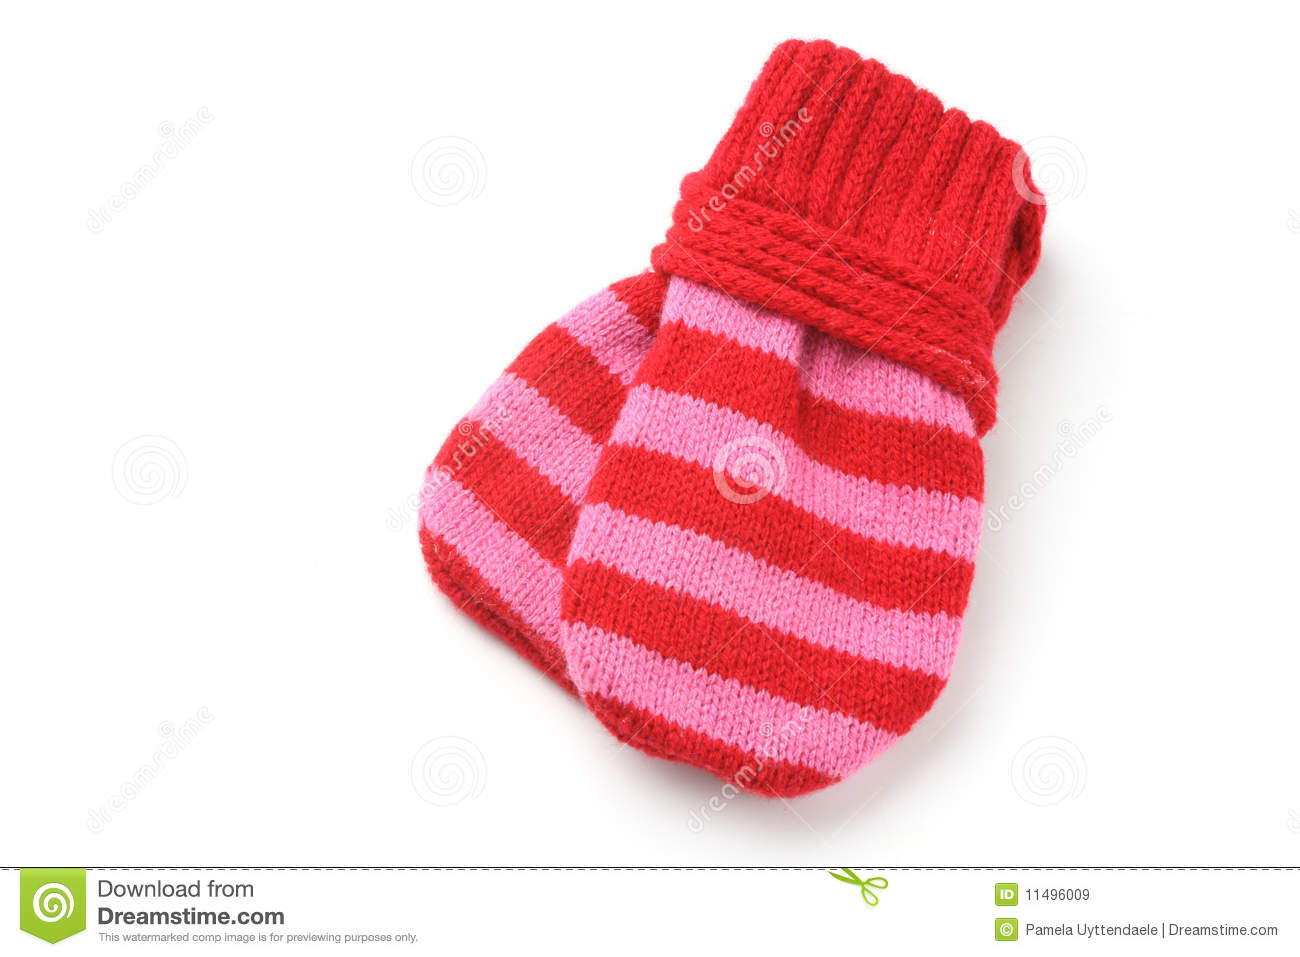 Woolen Baby Mittens Tied Together Royalty Free Stock Images   Image